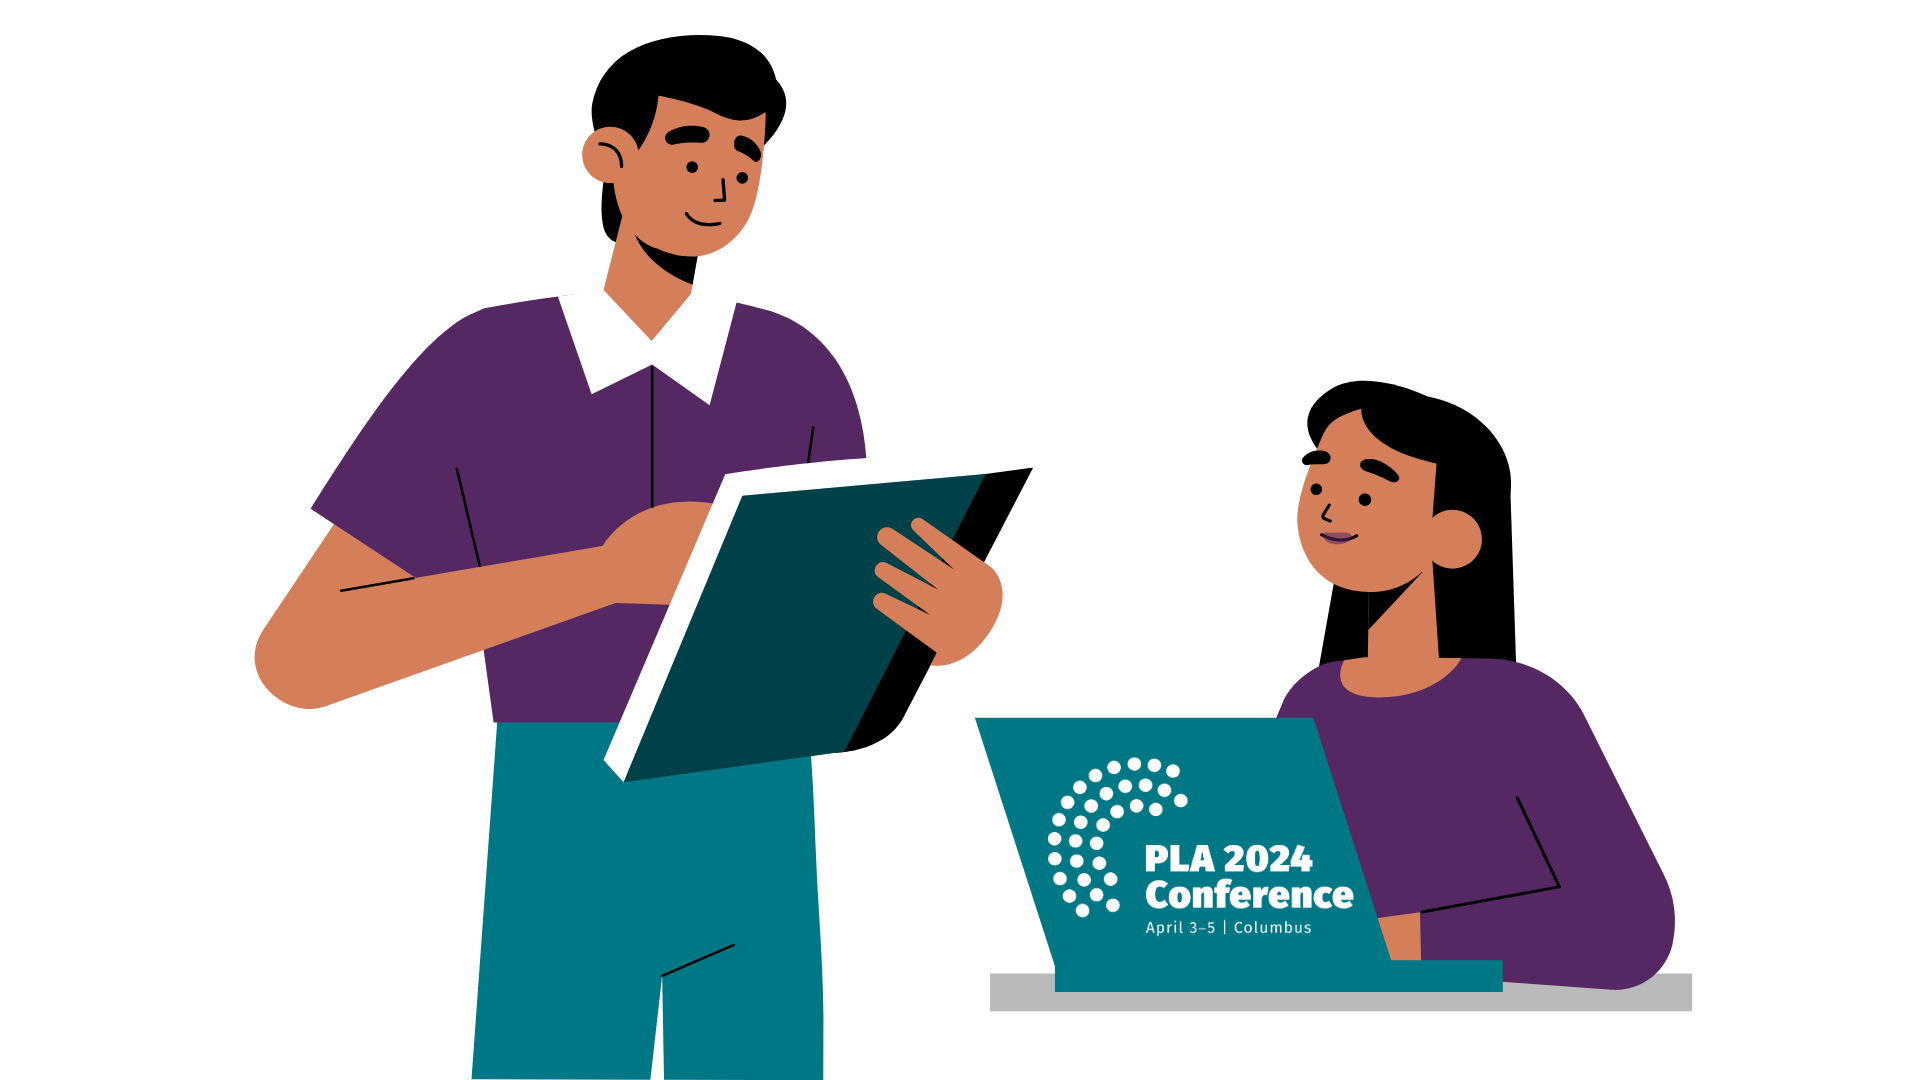 Illustration of two people wearing purple and blue clothing. One person is standing and holding a book. The other person is sitting holding a laptop with the PLA 2024 Conference logo.